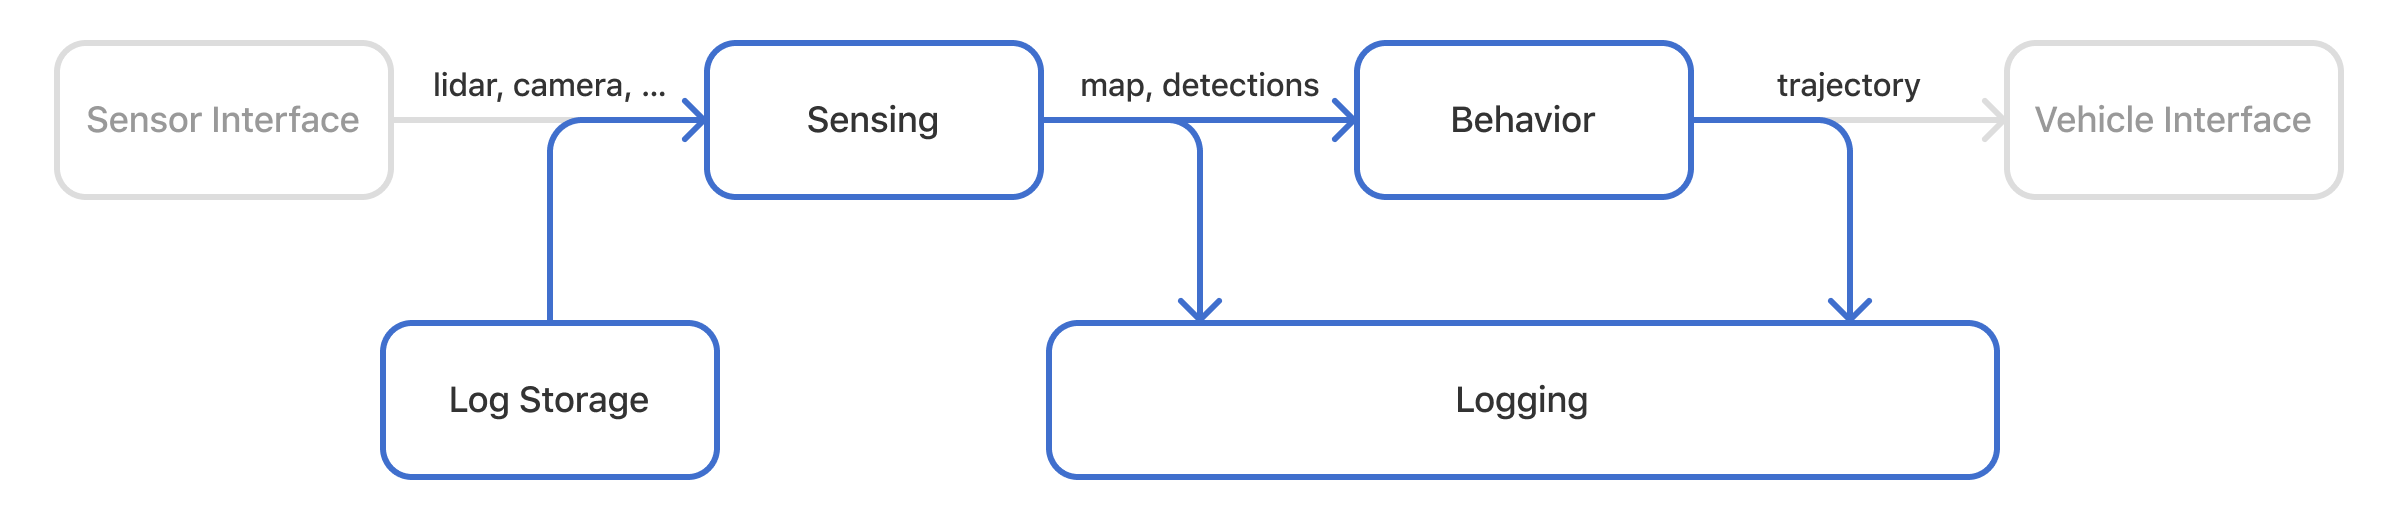 A modified block diagram with an arrow labeled lidar and camera pointing from Log Storage into Sensing. The diagram contains two main components: Sensing and Behavior. Sensing feeds map and detections into Behavior. The additional components Sensor Interface and Vehicle Interface are drawn in gray.